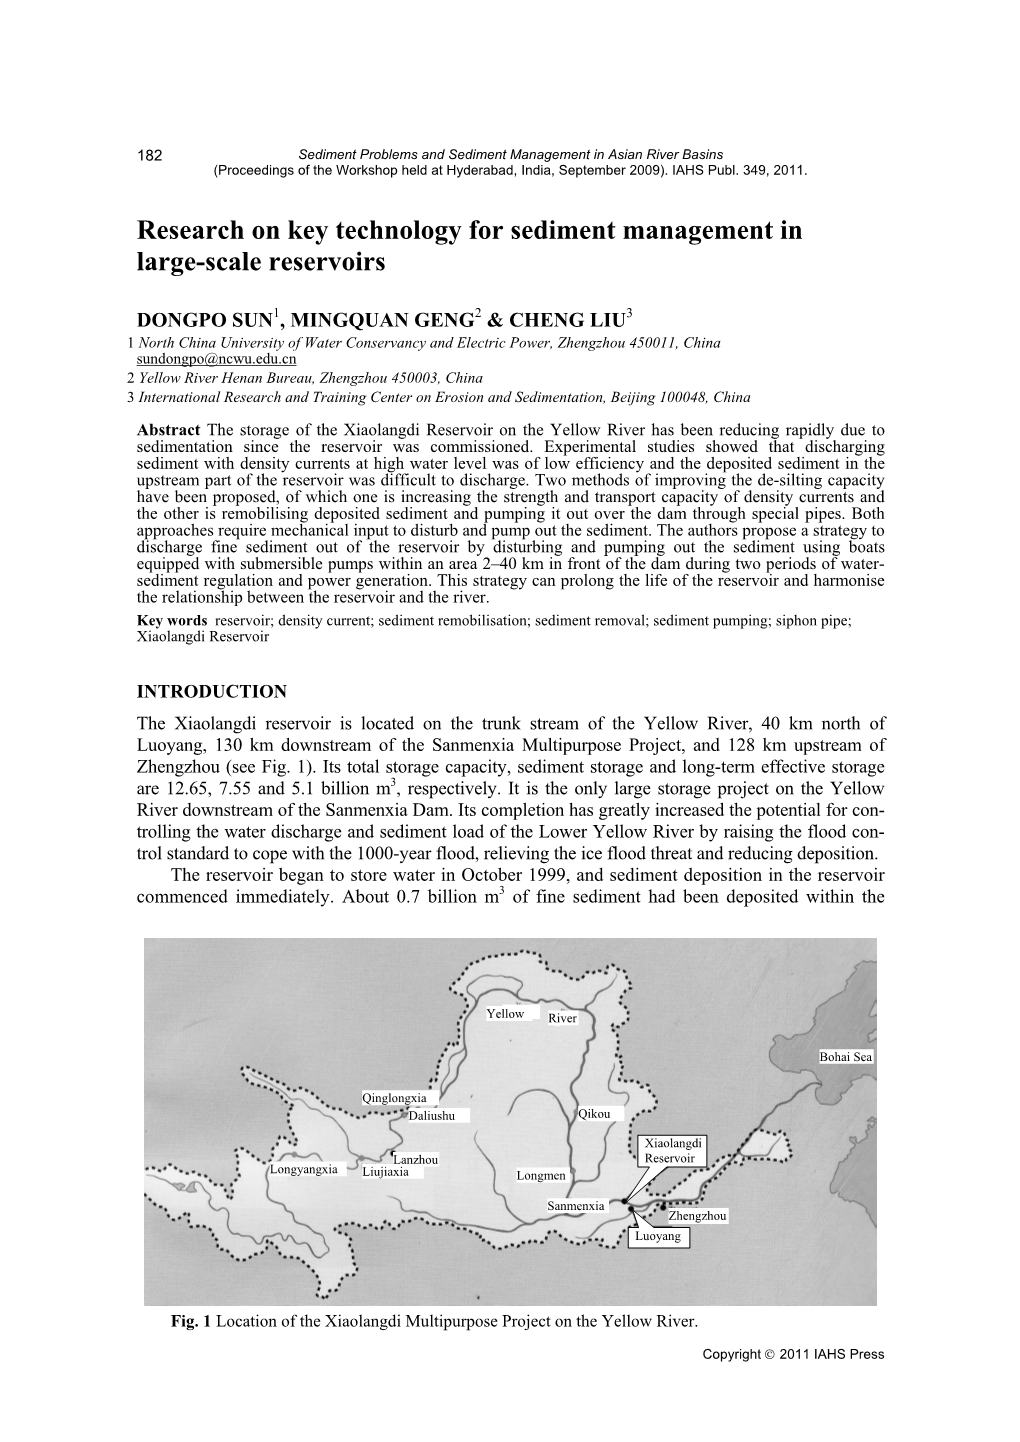 Research on Key Technology for Sediment Management in Large-Scale Reservoirs